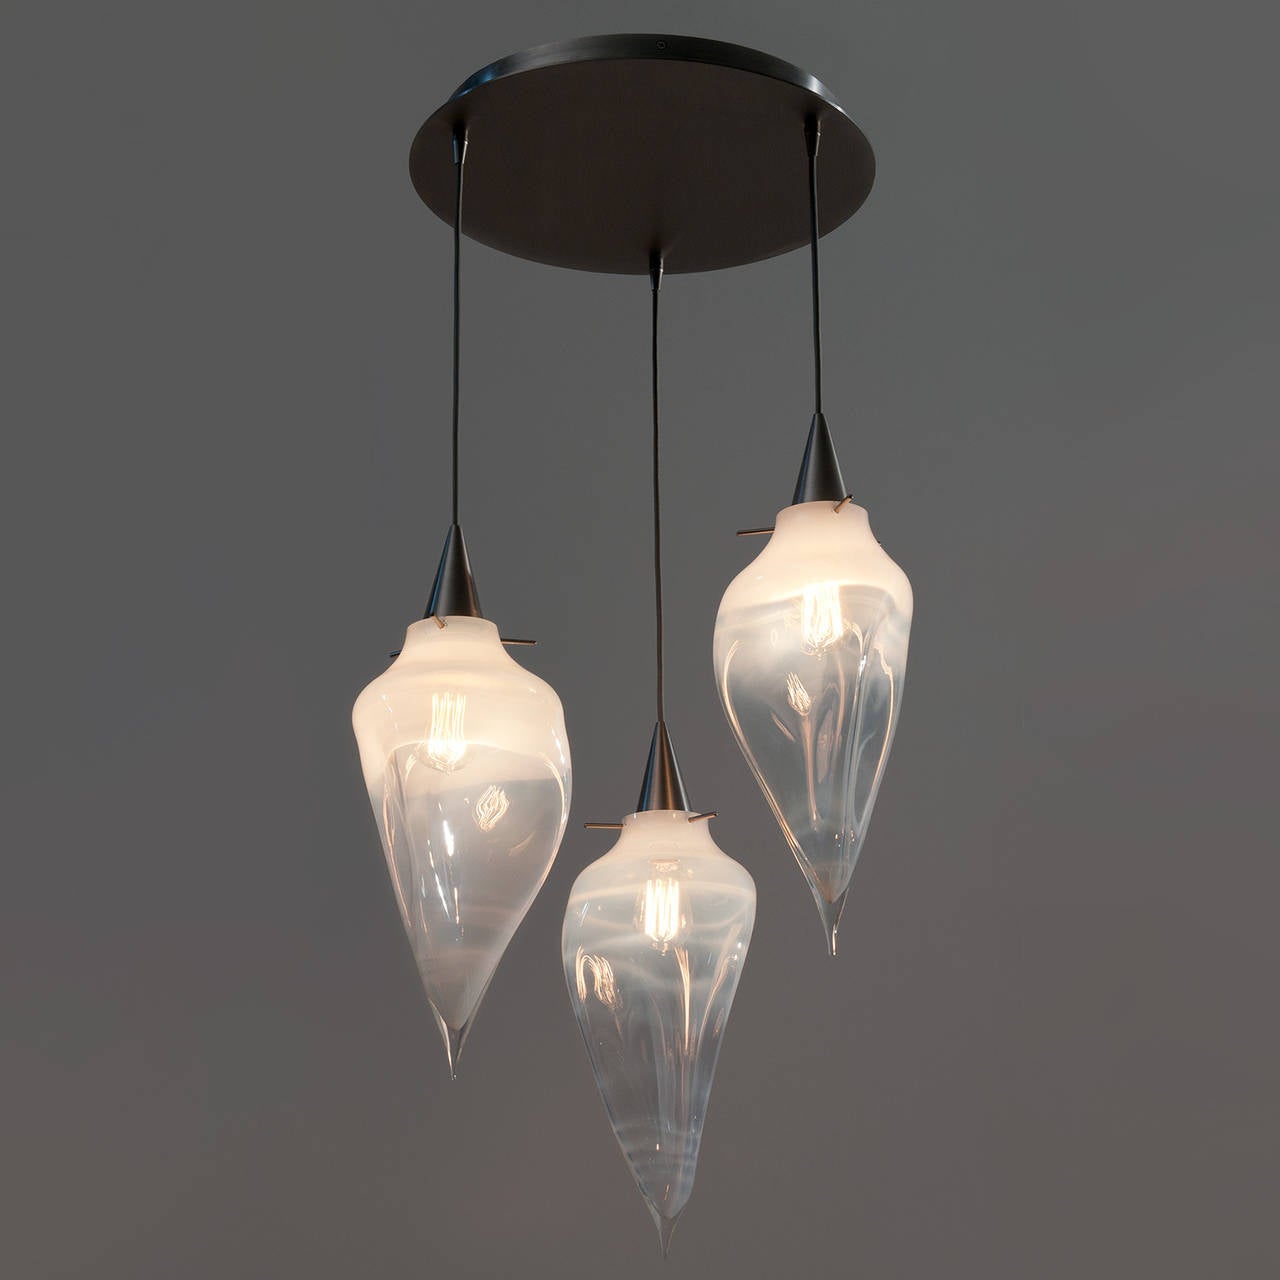 The Rock Pendants feature undulating forms that move like molten glass. This chandelier groups three handblown pendants on a central chandelier canopy.

We specialize in custom commissions.
Custom materials, finishes and dimensions available.